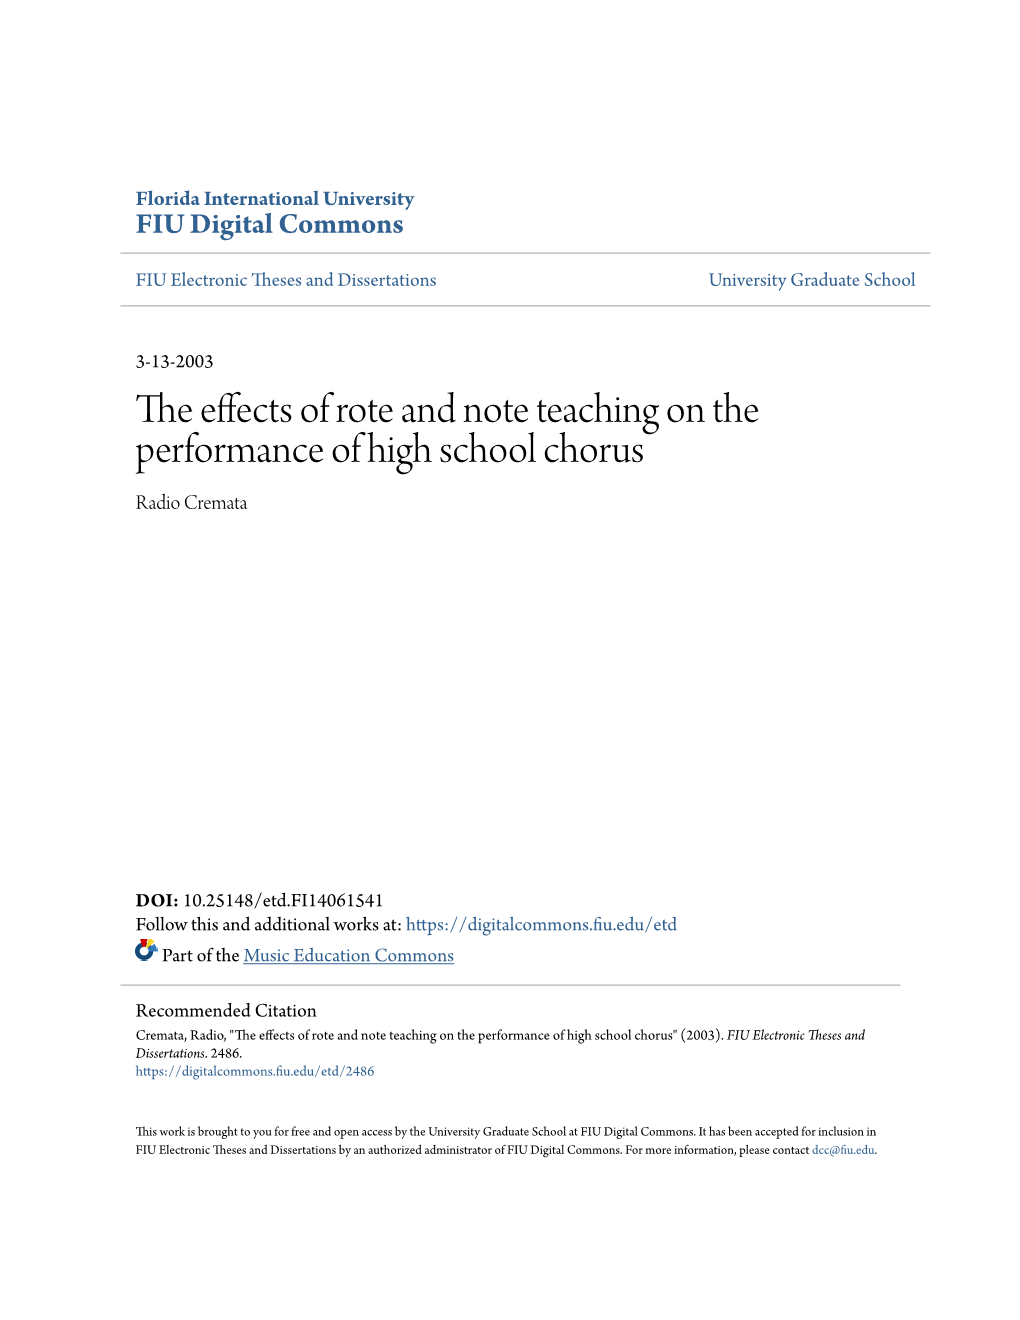 The Effects of Rote and Note Teaching on the Performance of High School Chorus Radio Cremata